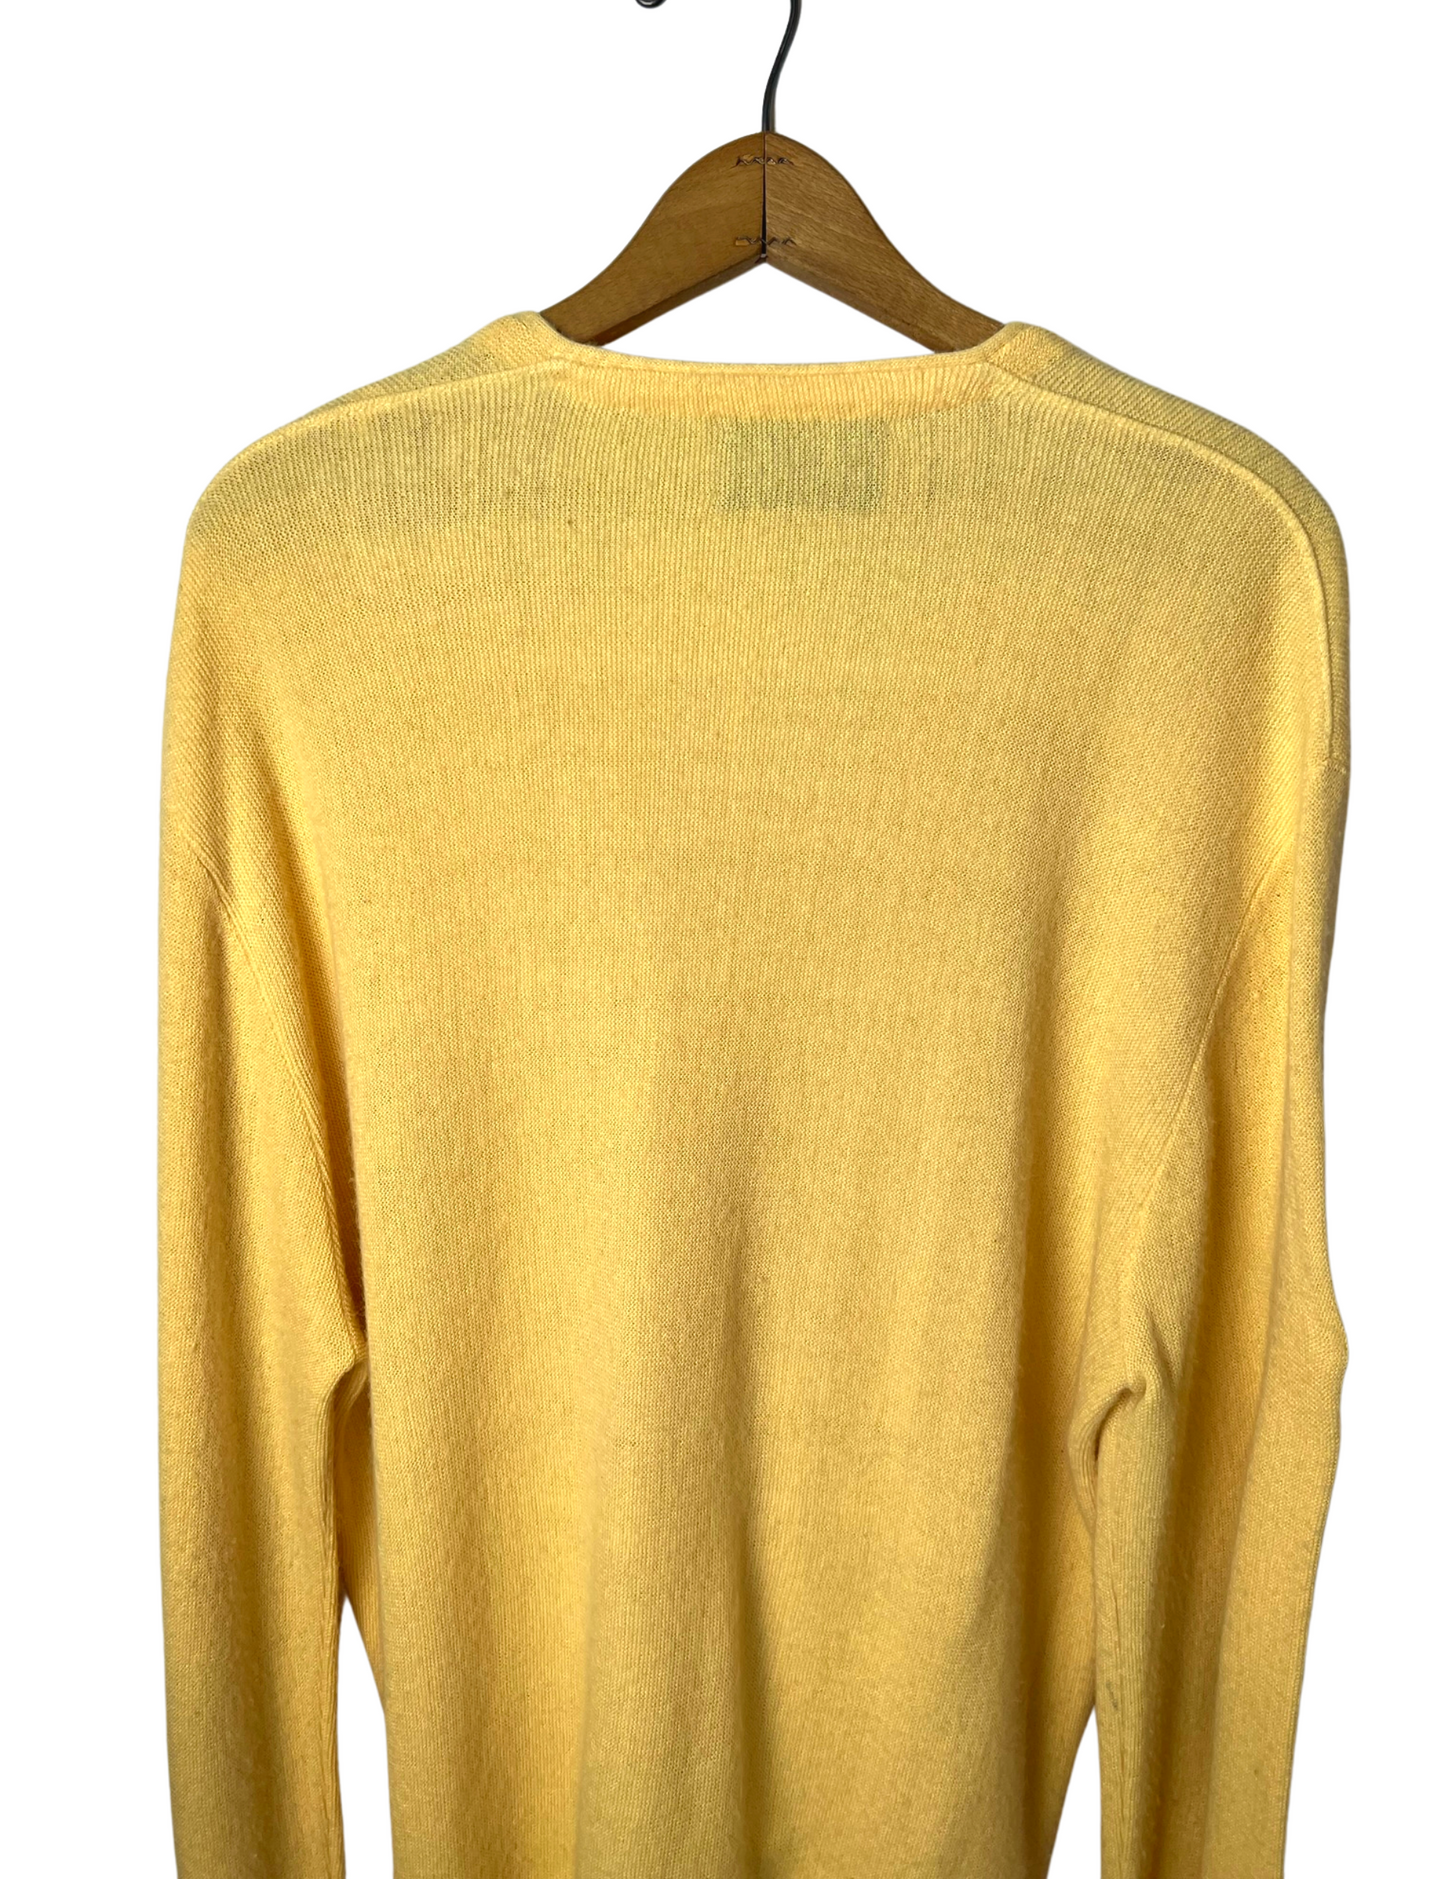 80’s Butter Yellow Arnold Palmer Basic V-Neck Cardigan Sweater